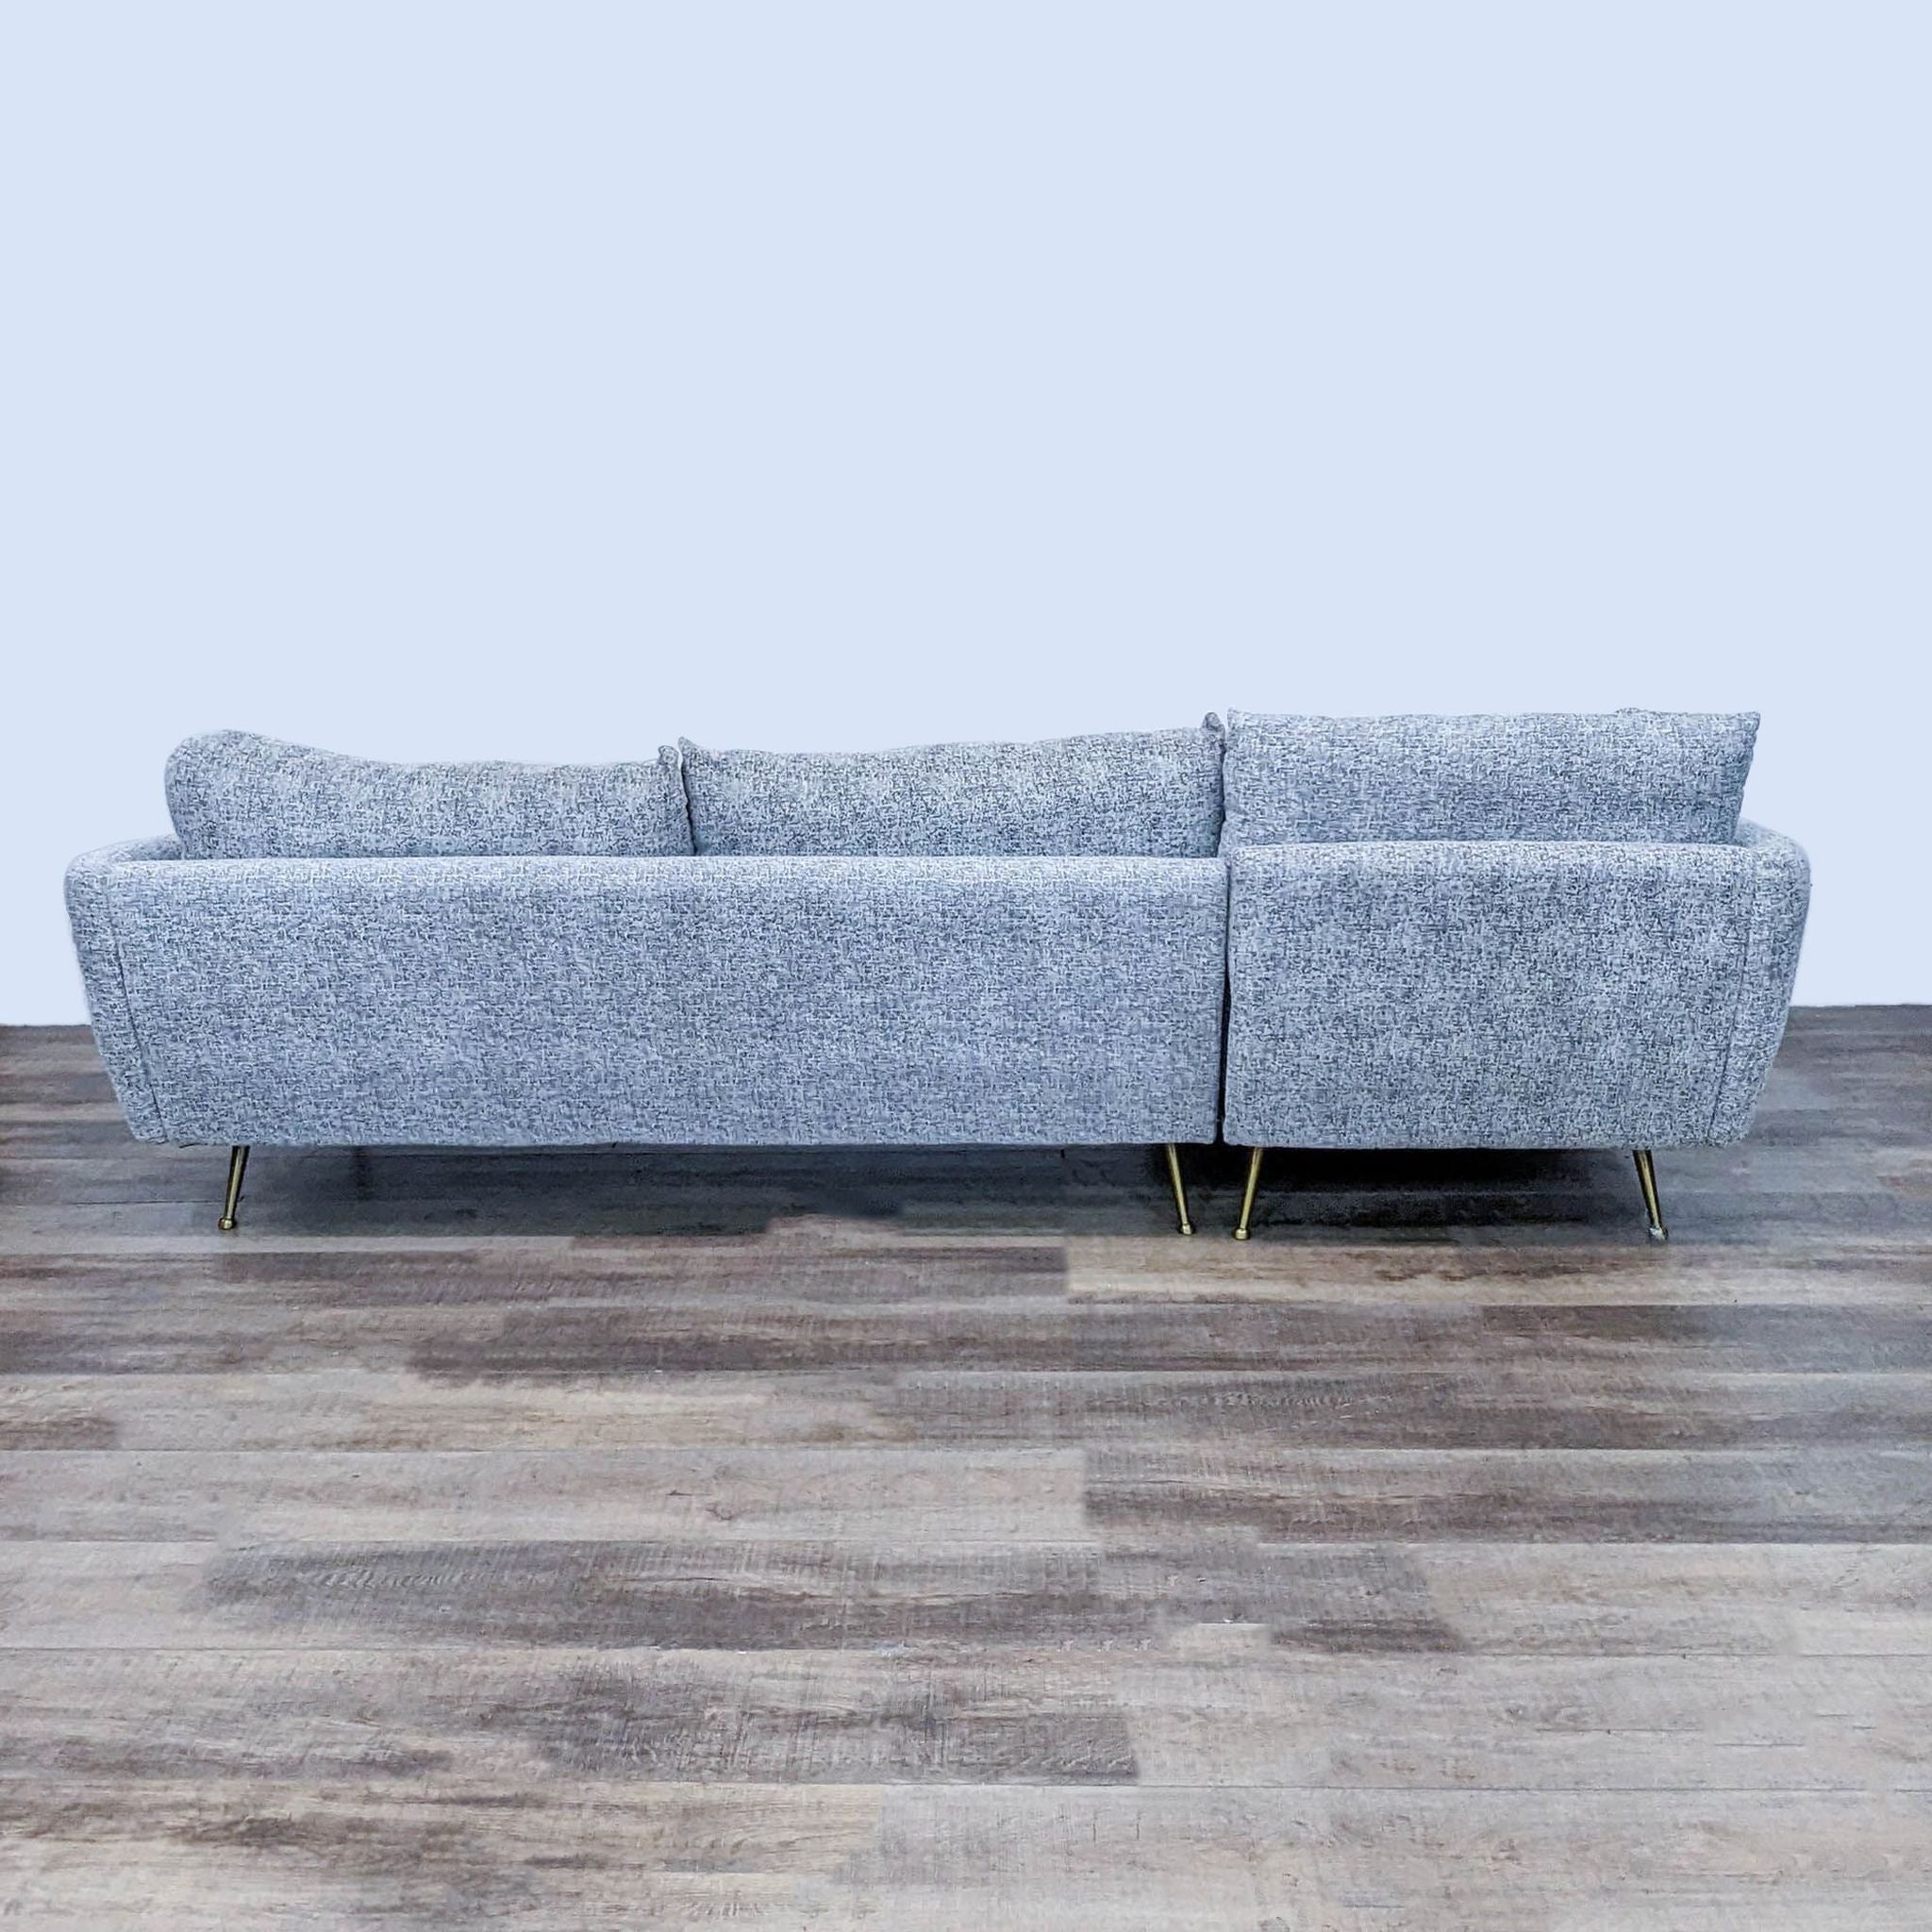 3. "Rear view of an Albany Park grey fabric sectional sofa, highlighting its simple design and sleek brass legs against a wooden floor background."